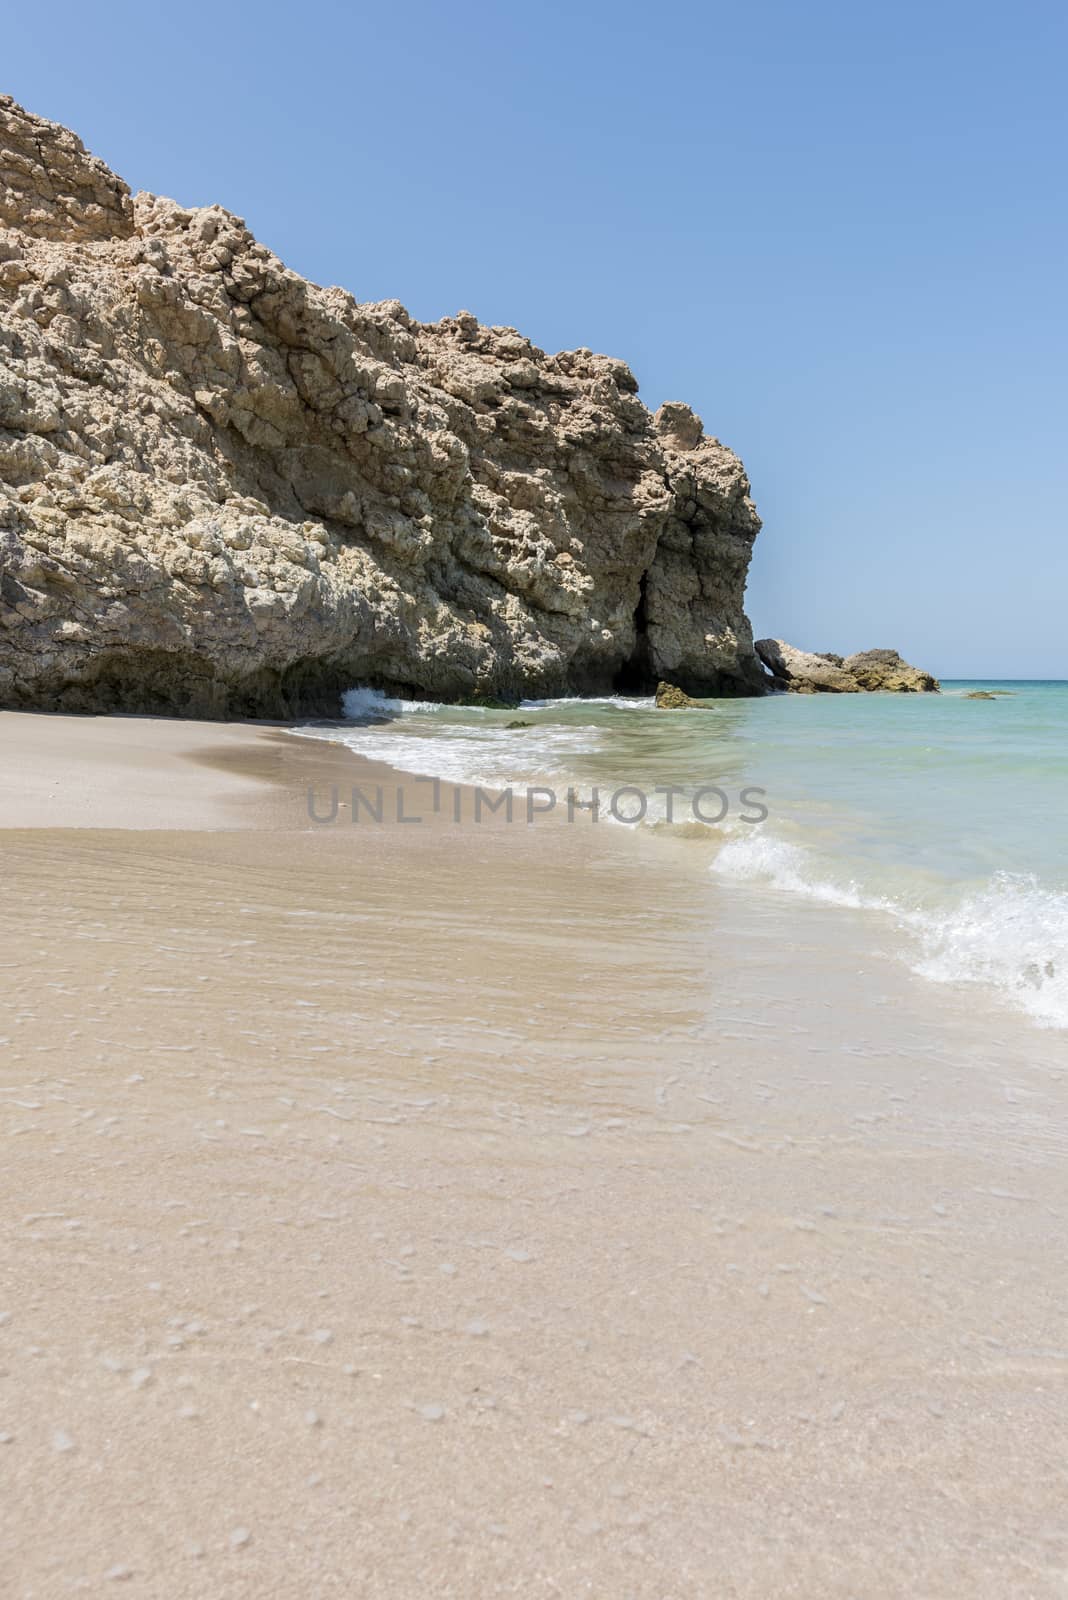 Wild beach at the coat of Ras Al Jinz, Sultanate of Oman. It is close to Ras Al Hadd and many turtles are coming in the region to nest